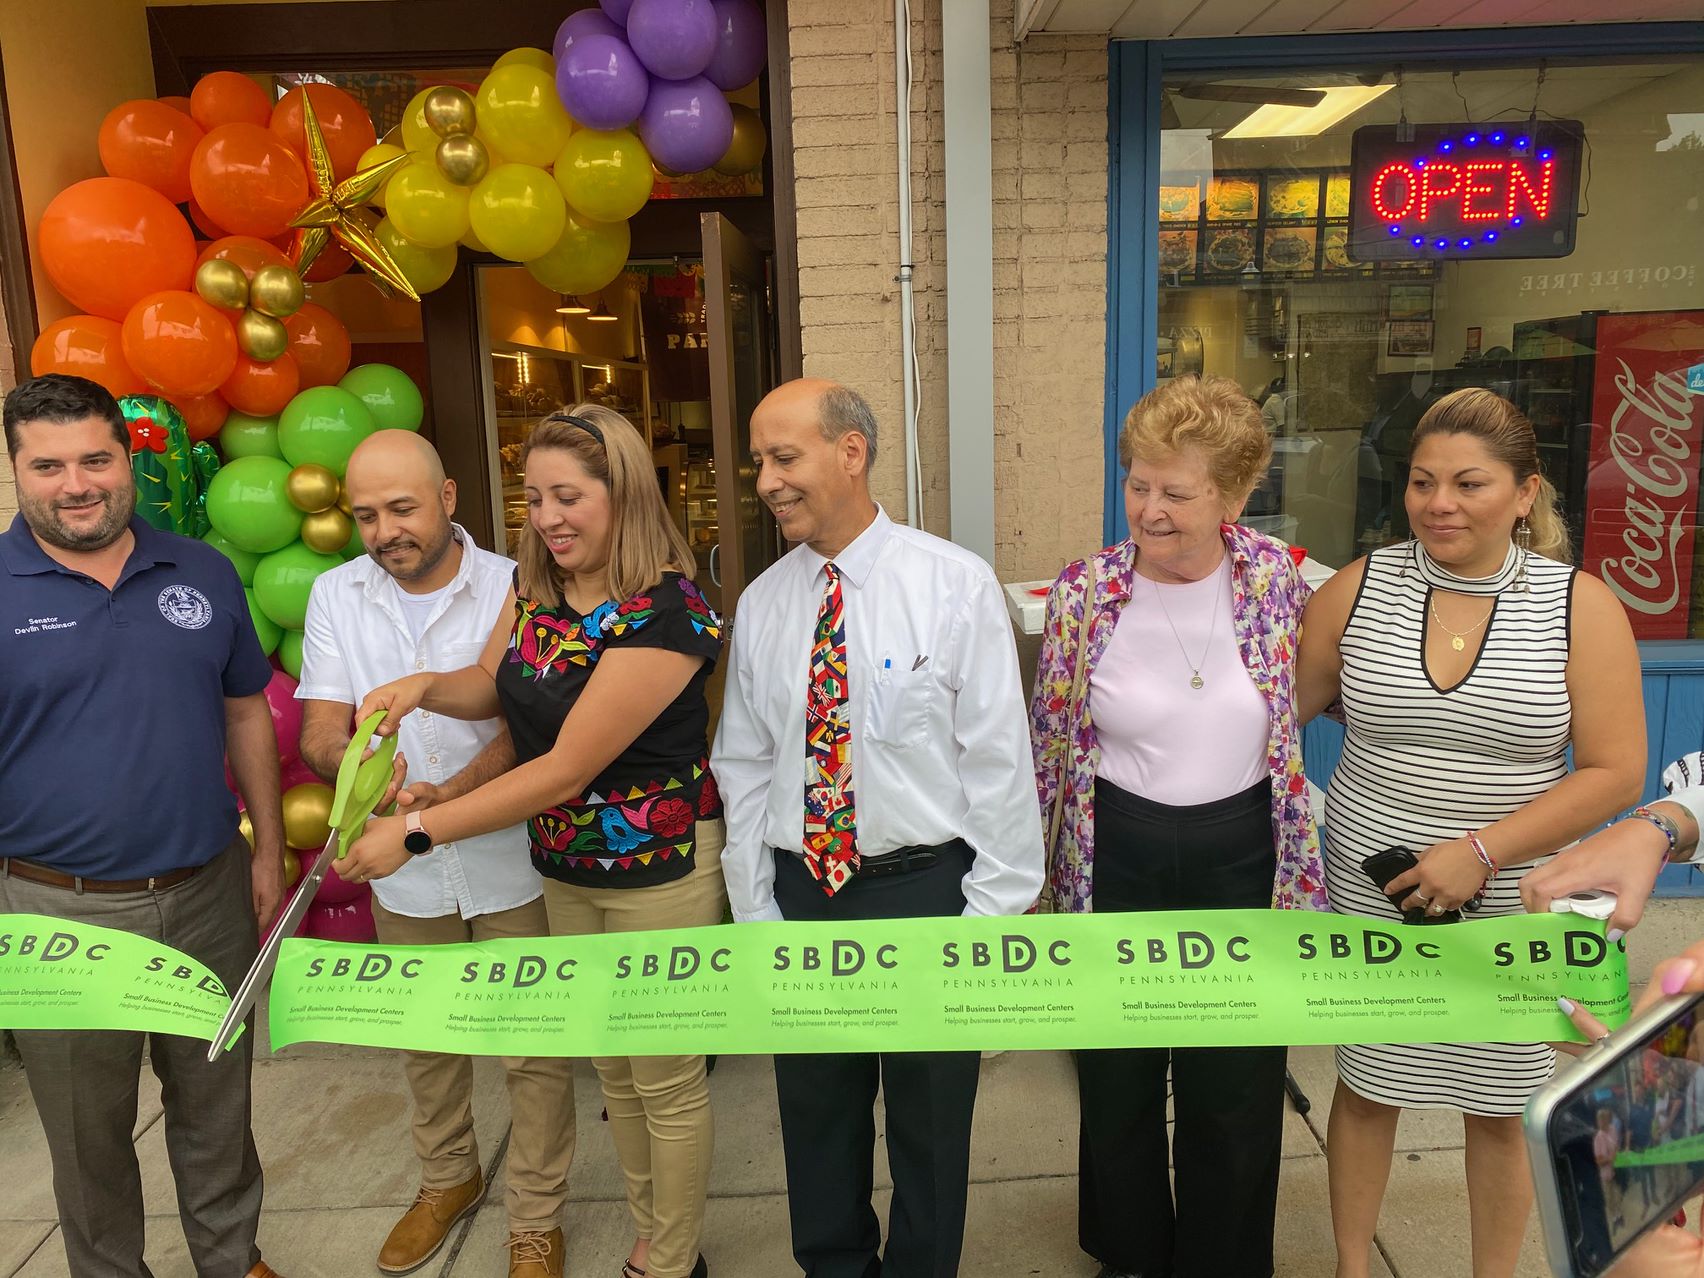 Owners of Panaderia Jazmin cut the ribbon opening their bakery in Mt. Lebanon